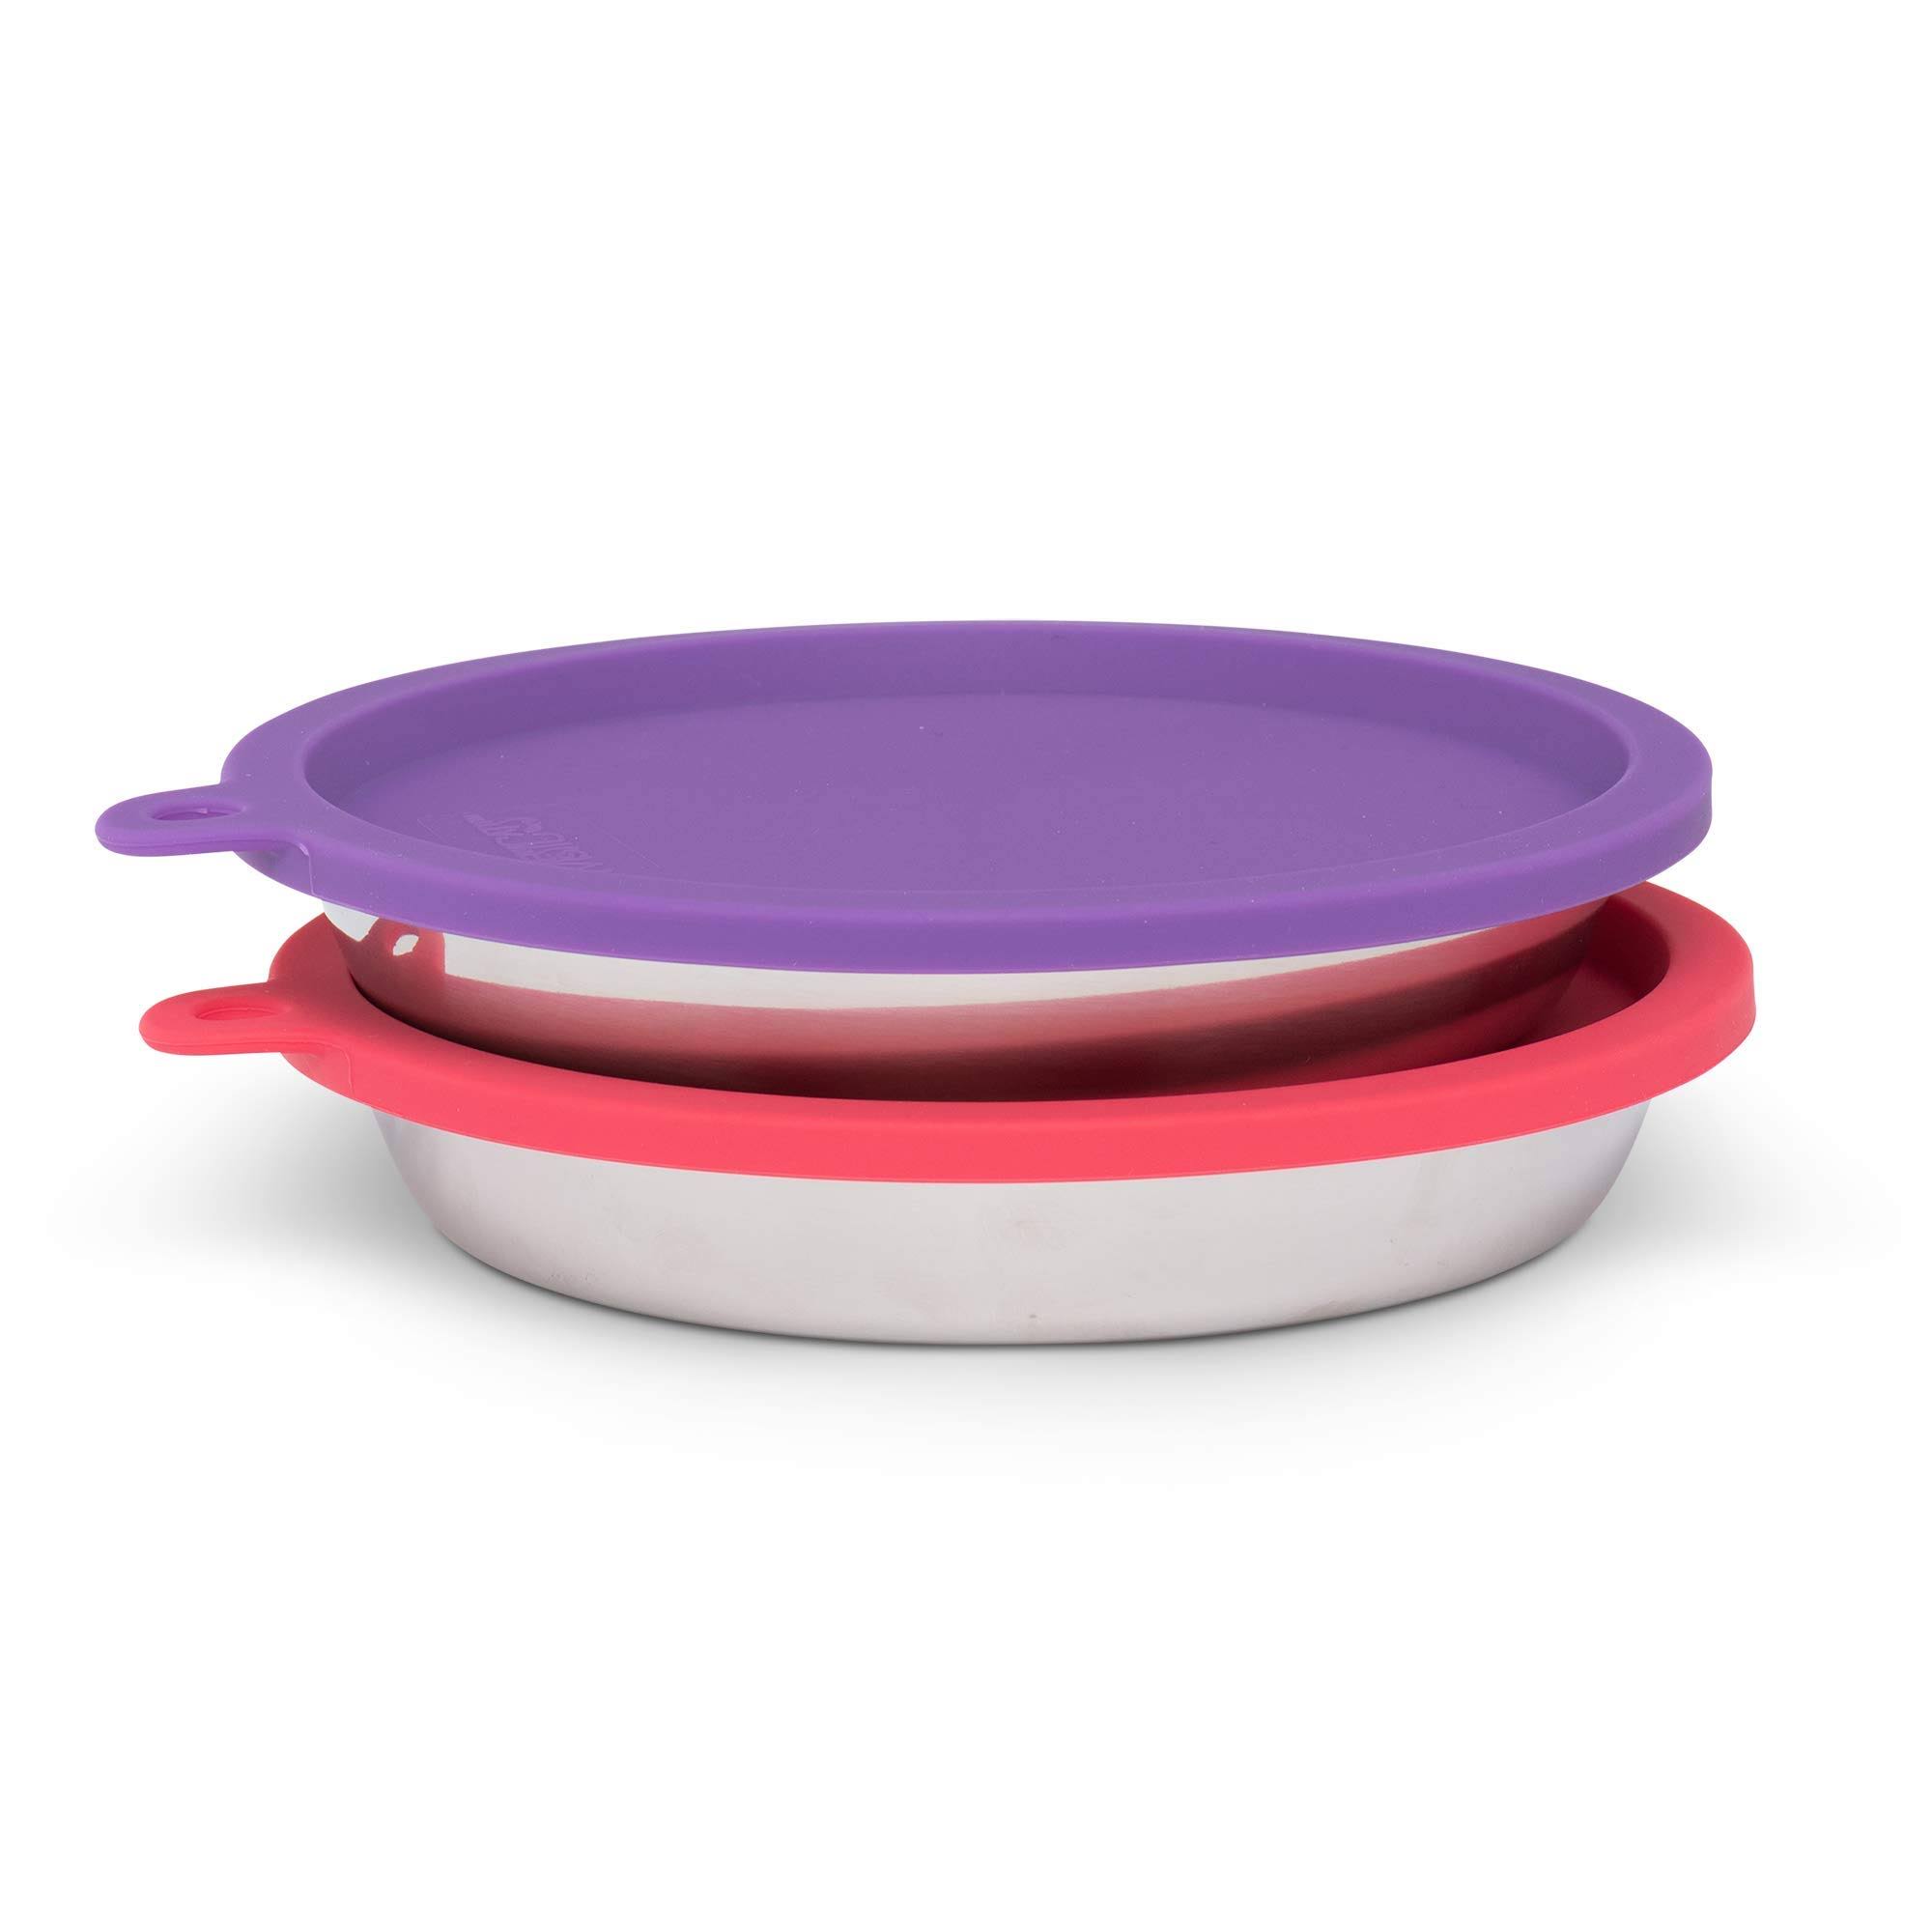 Set of Stainless Saucer Shaped Bowls with Silicone Lids | Messy Mutts